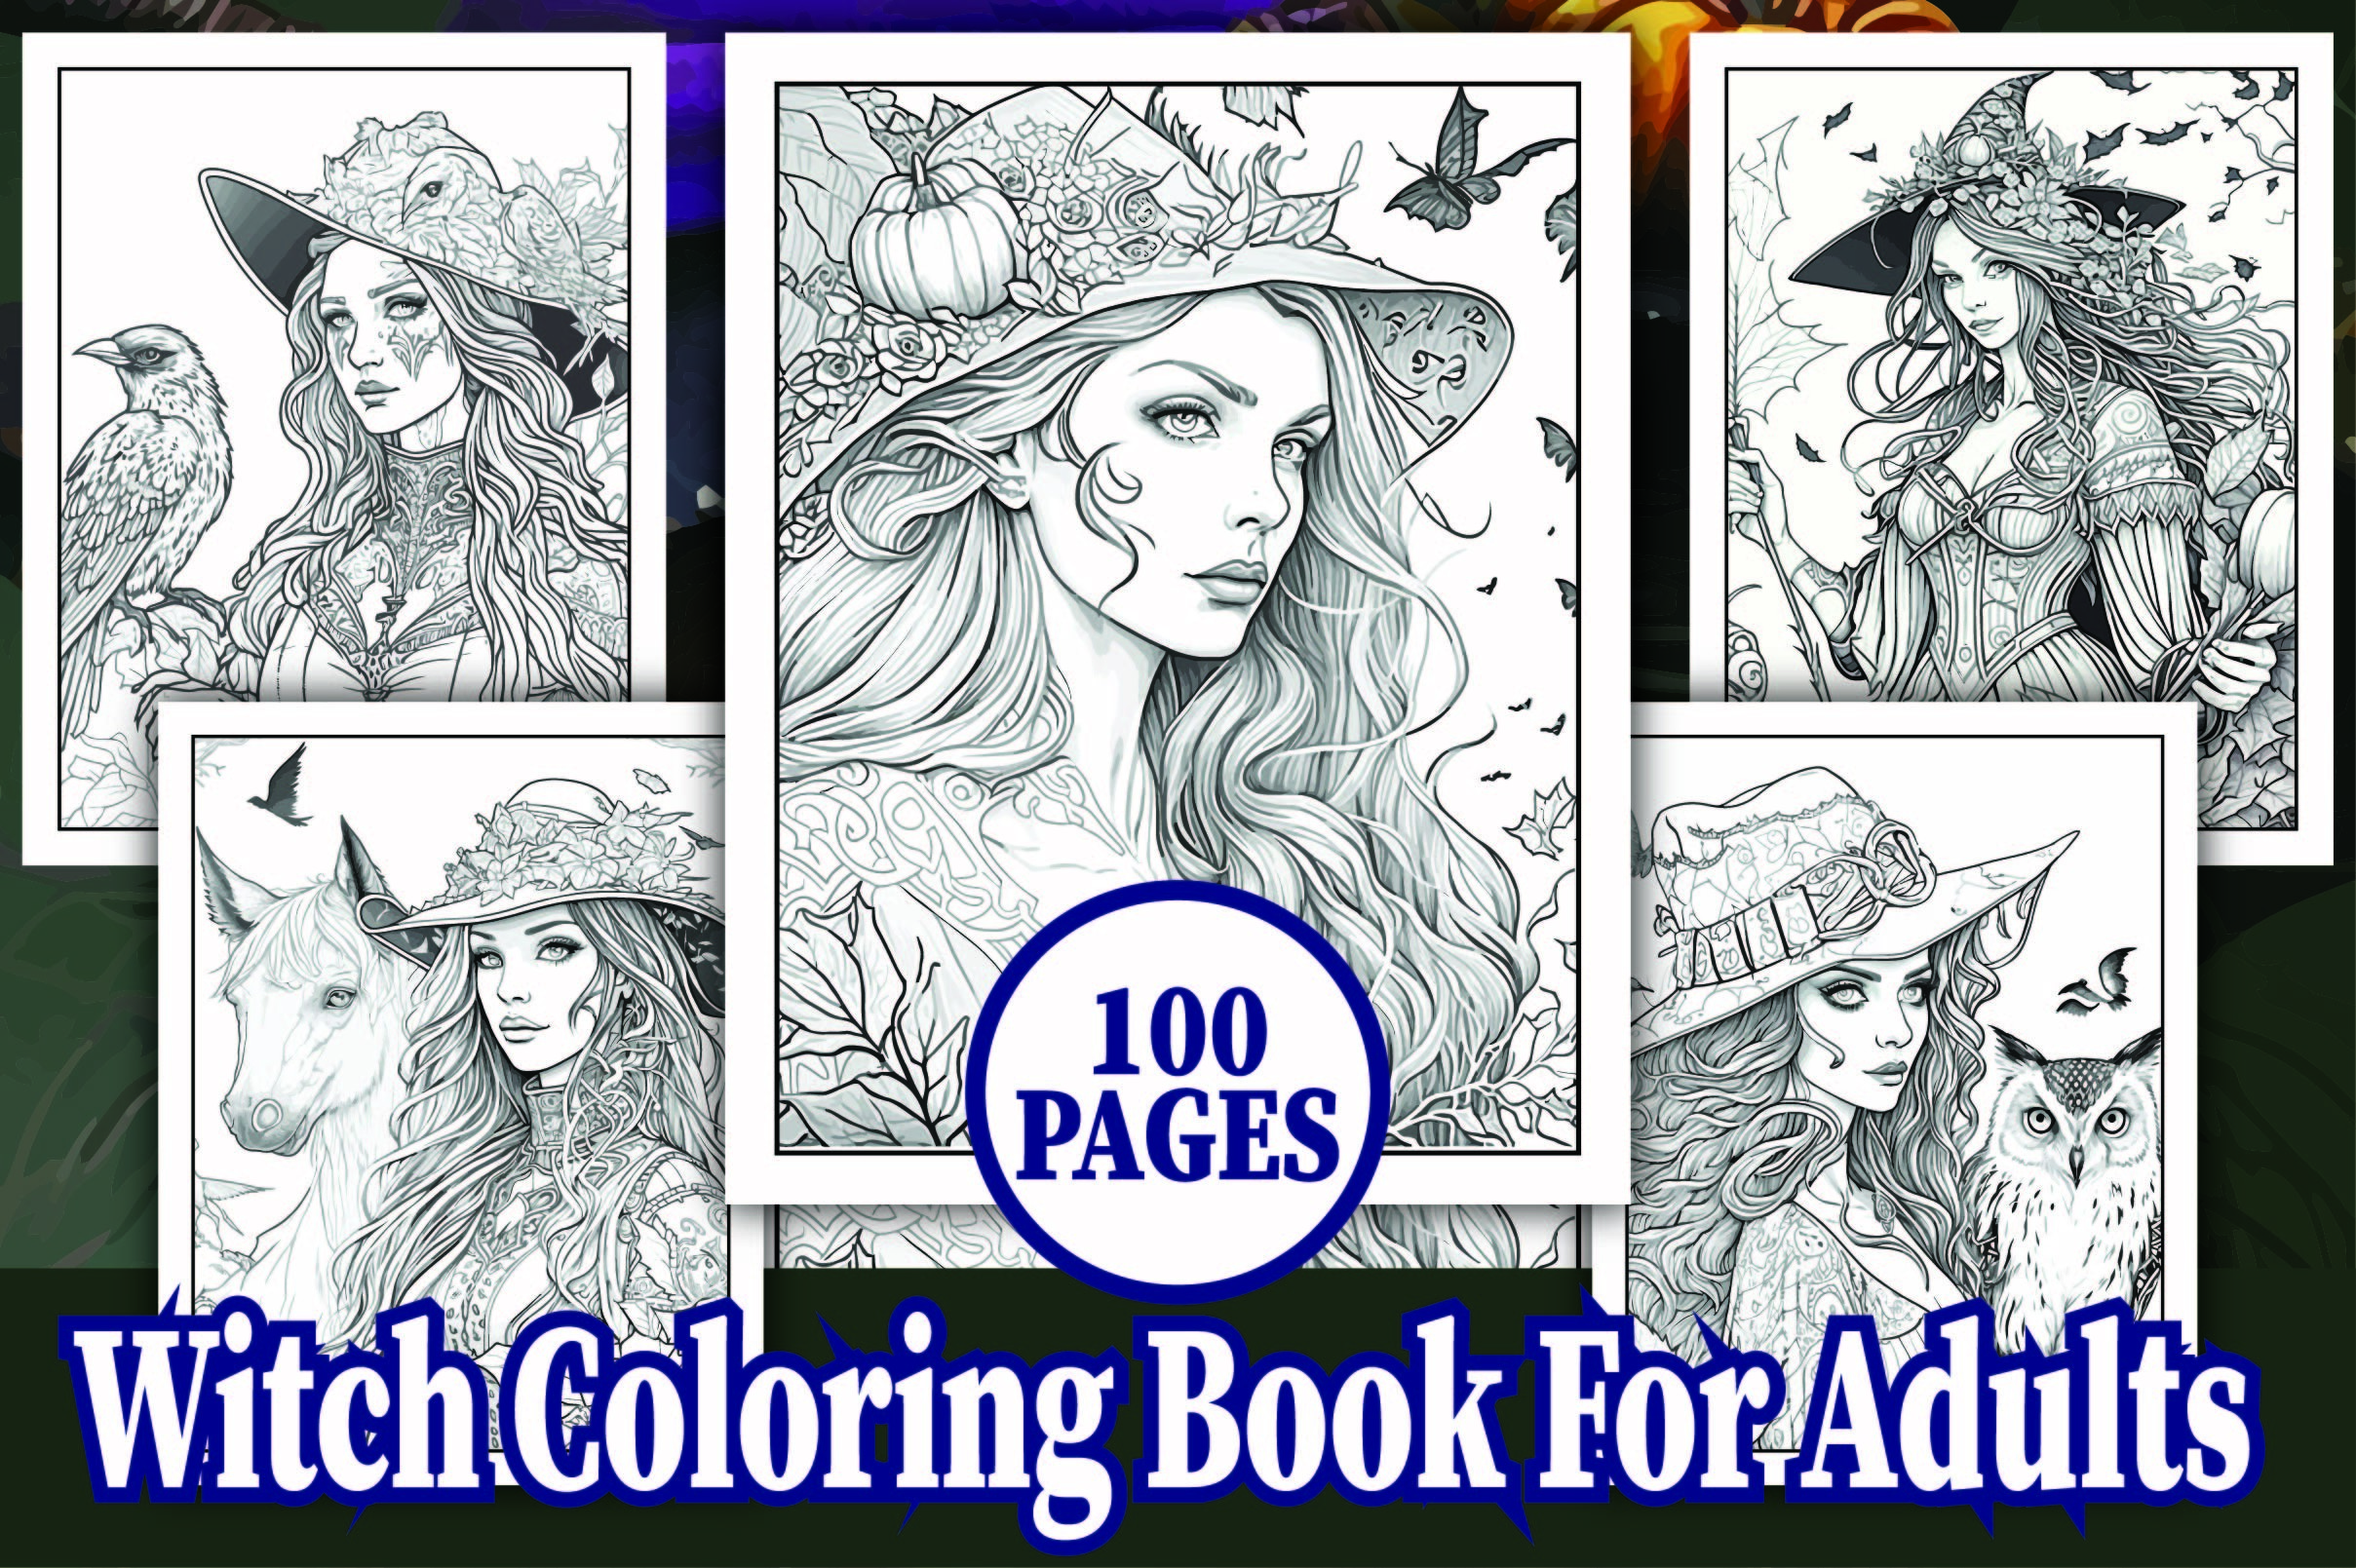 Witch Coloring Book KDP Interior Graphic by Design Creator Press ...